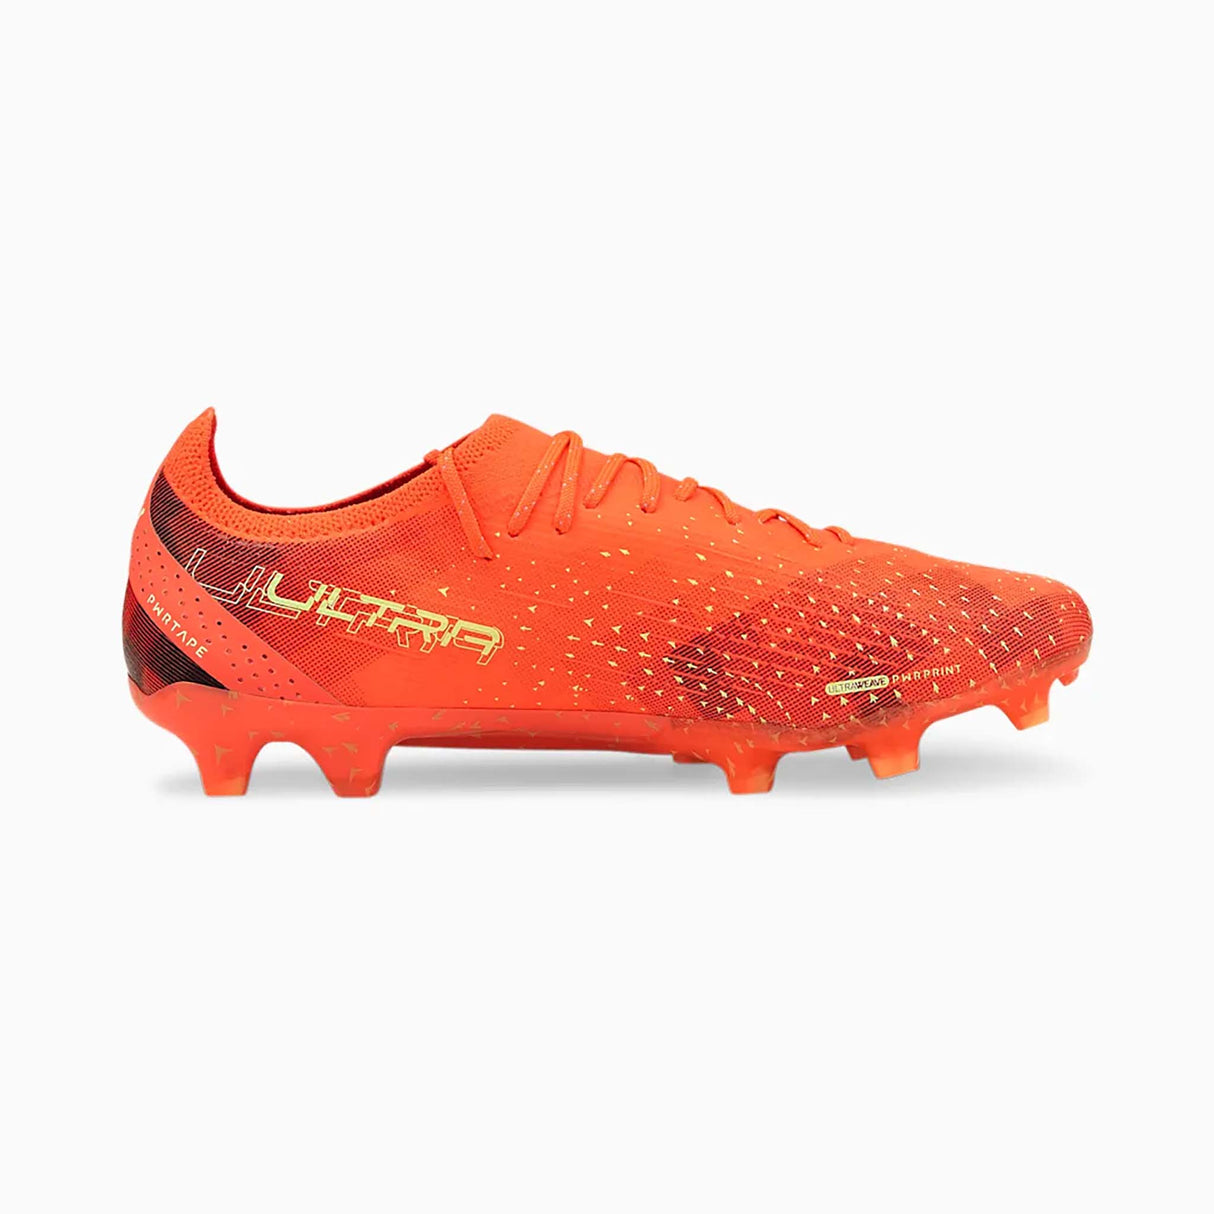 Souliers de soccer Puma Ultra Ultimate FG/AG adulte -fiery coral fizzy light lateral